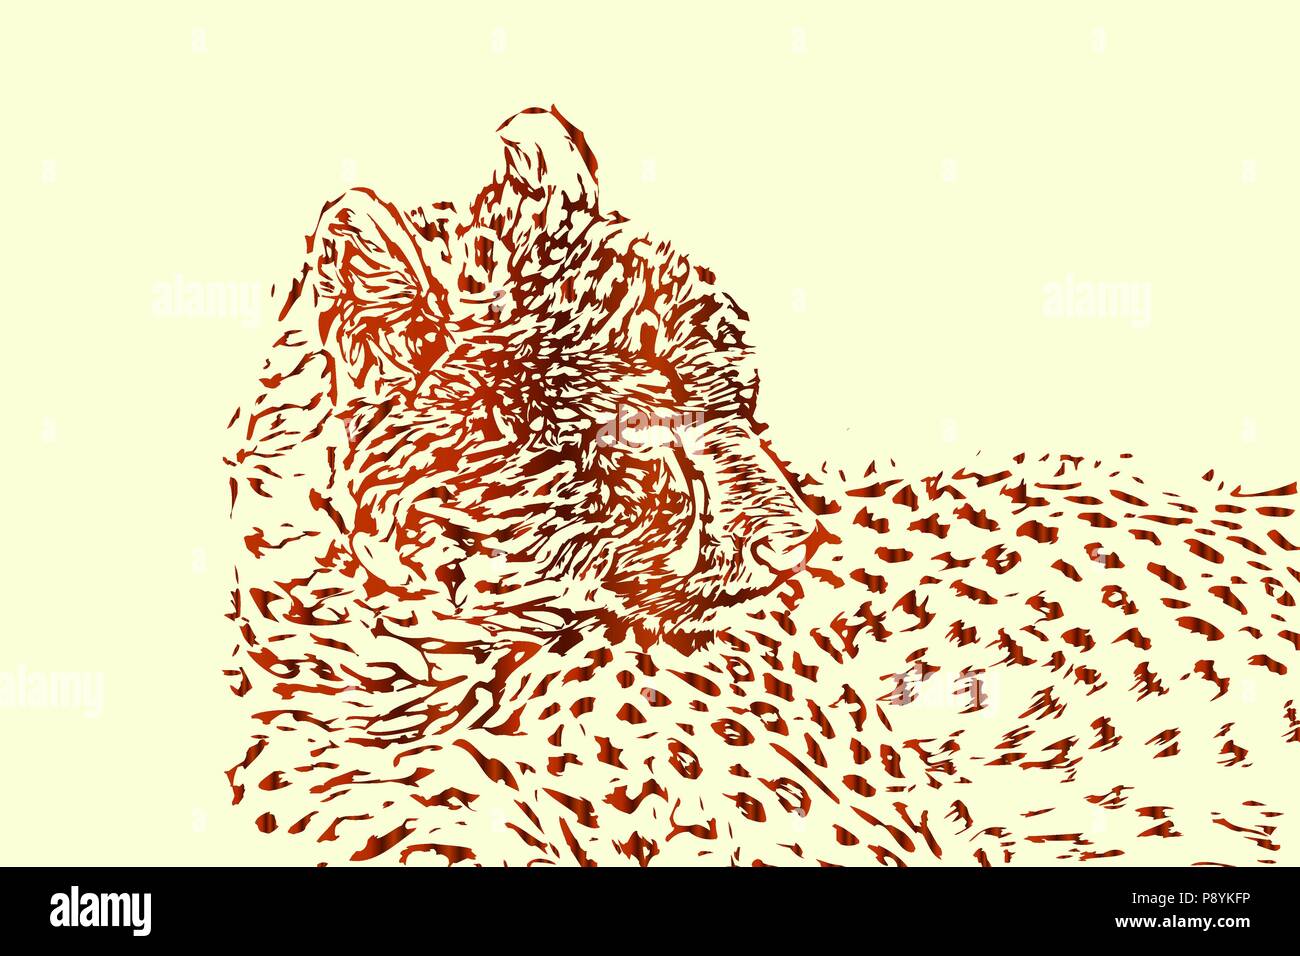 Cheetah vector sketch or drawing, abstract wildlife background illustration. Stock Vector